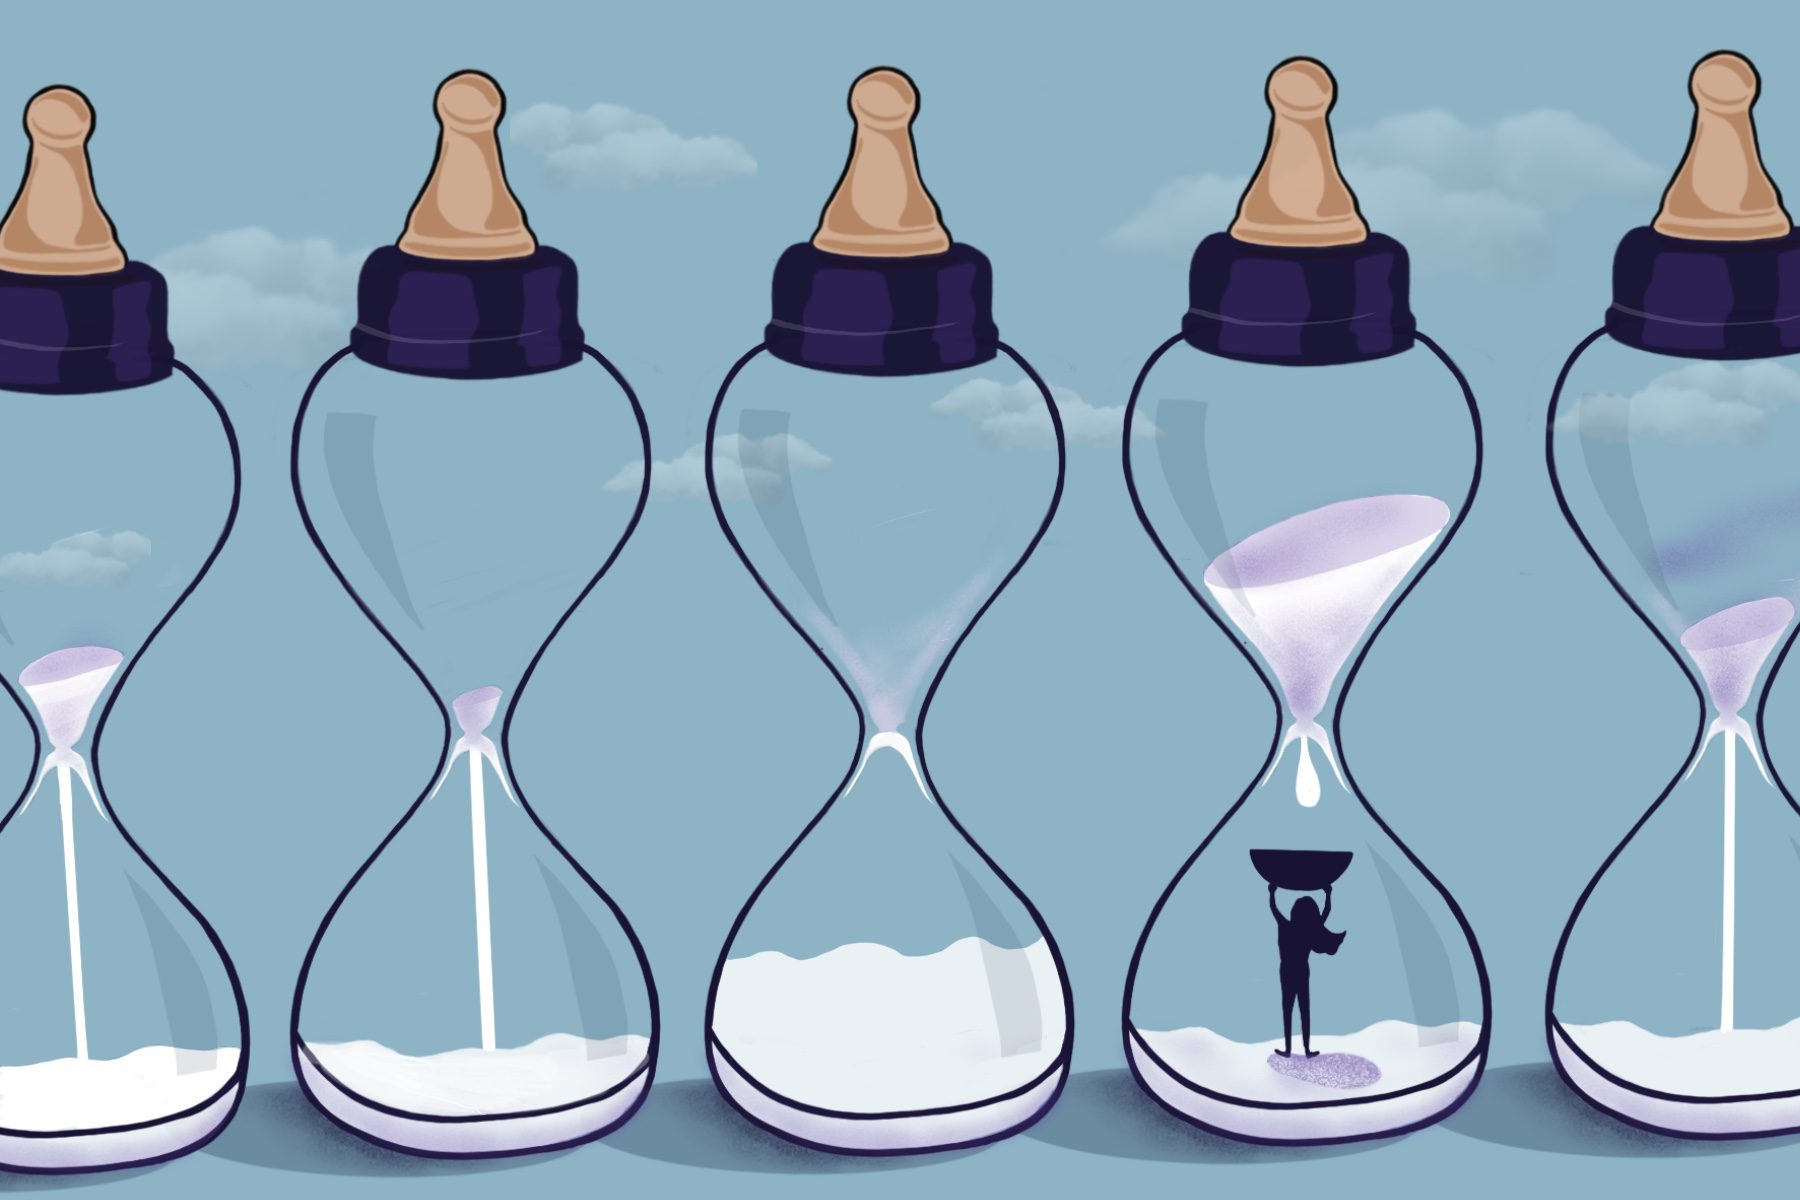 Illustration of different baby bottles shaped like hourglasses. In one of the bottles, a parent tries to catch the milk coming from the top of the hourglass into a bowl.